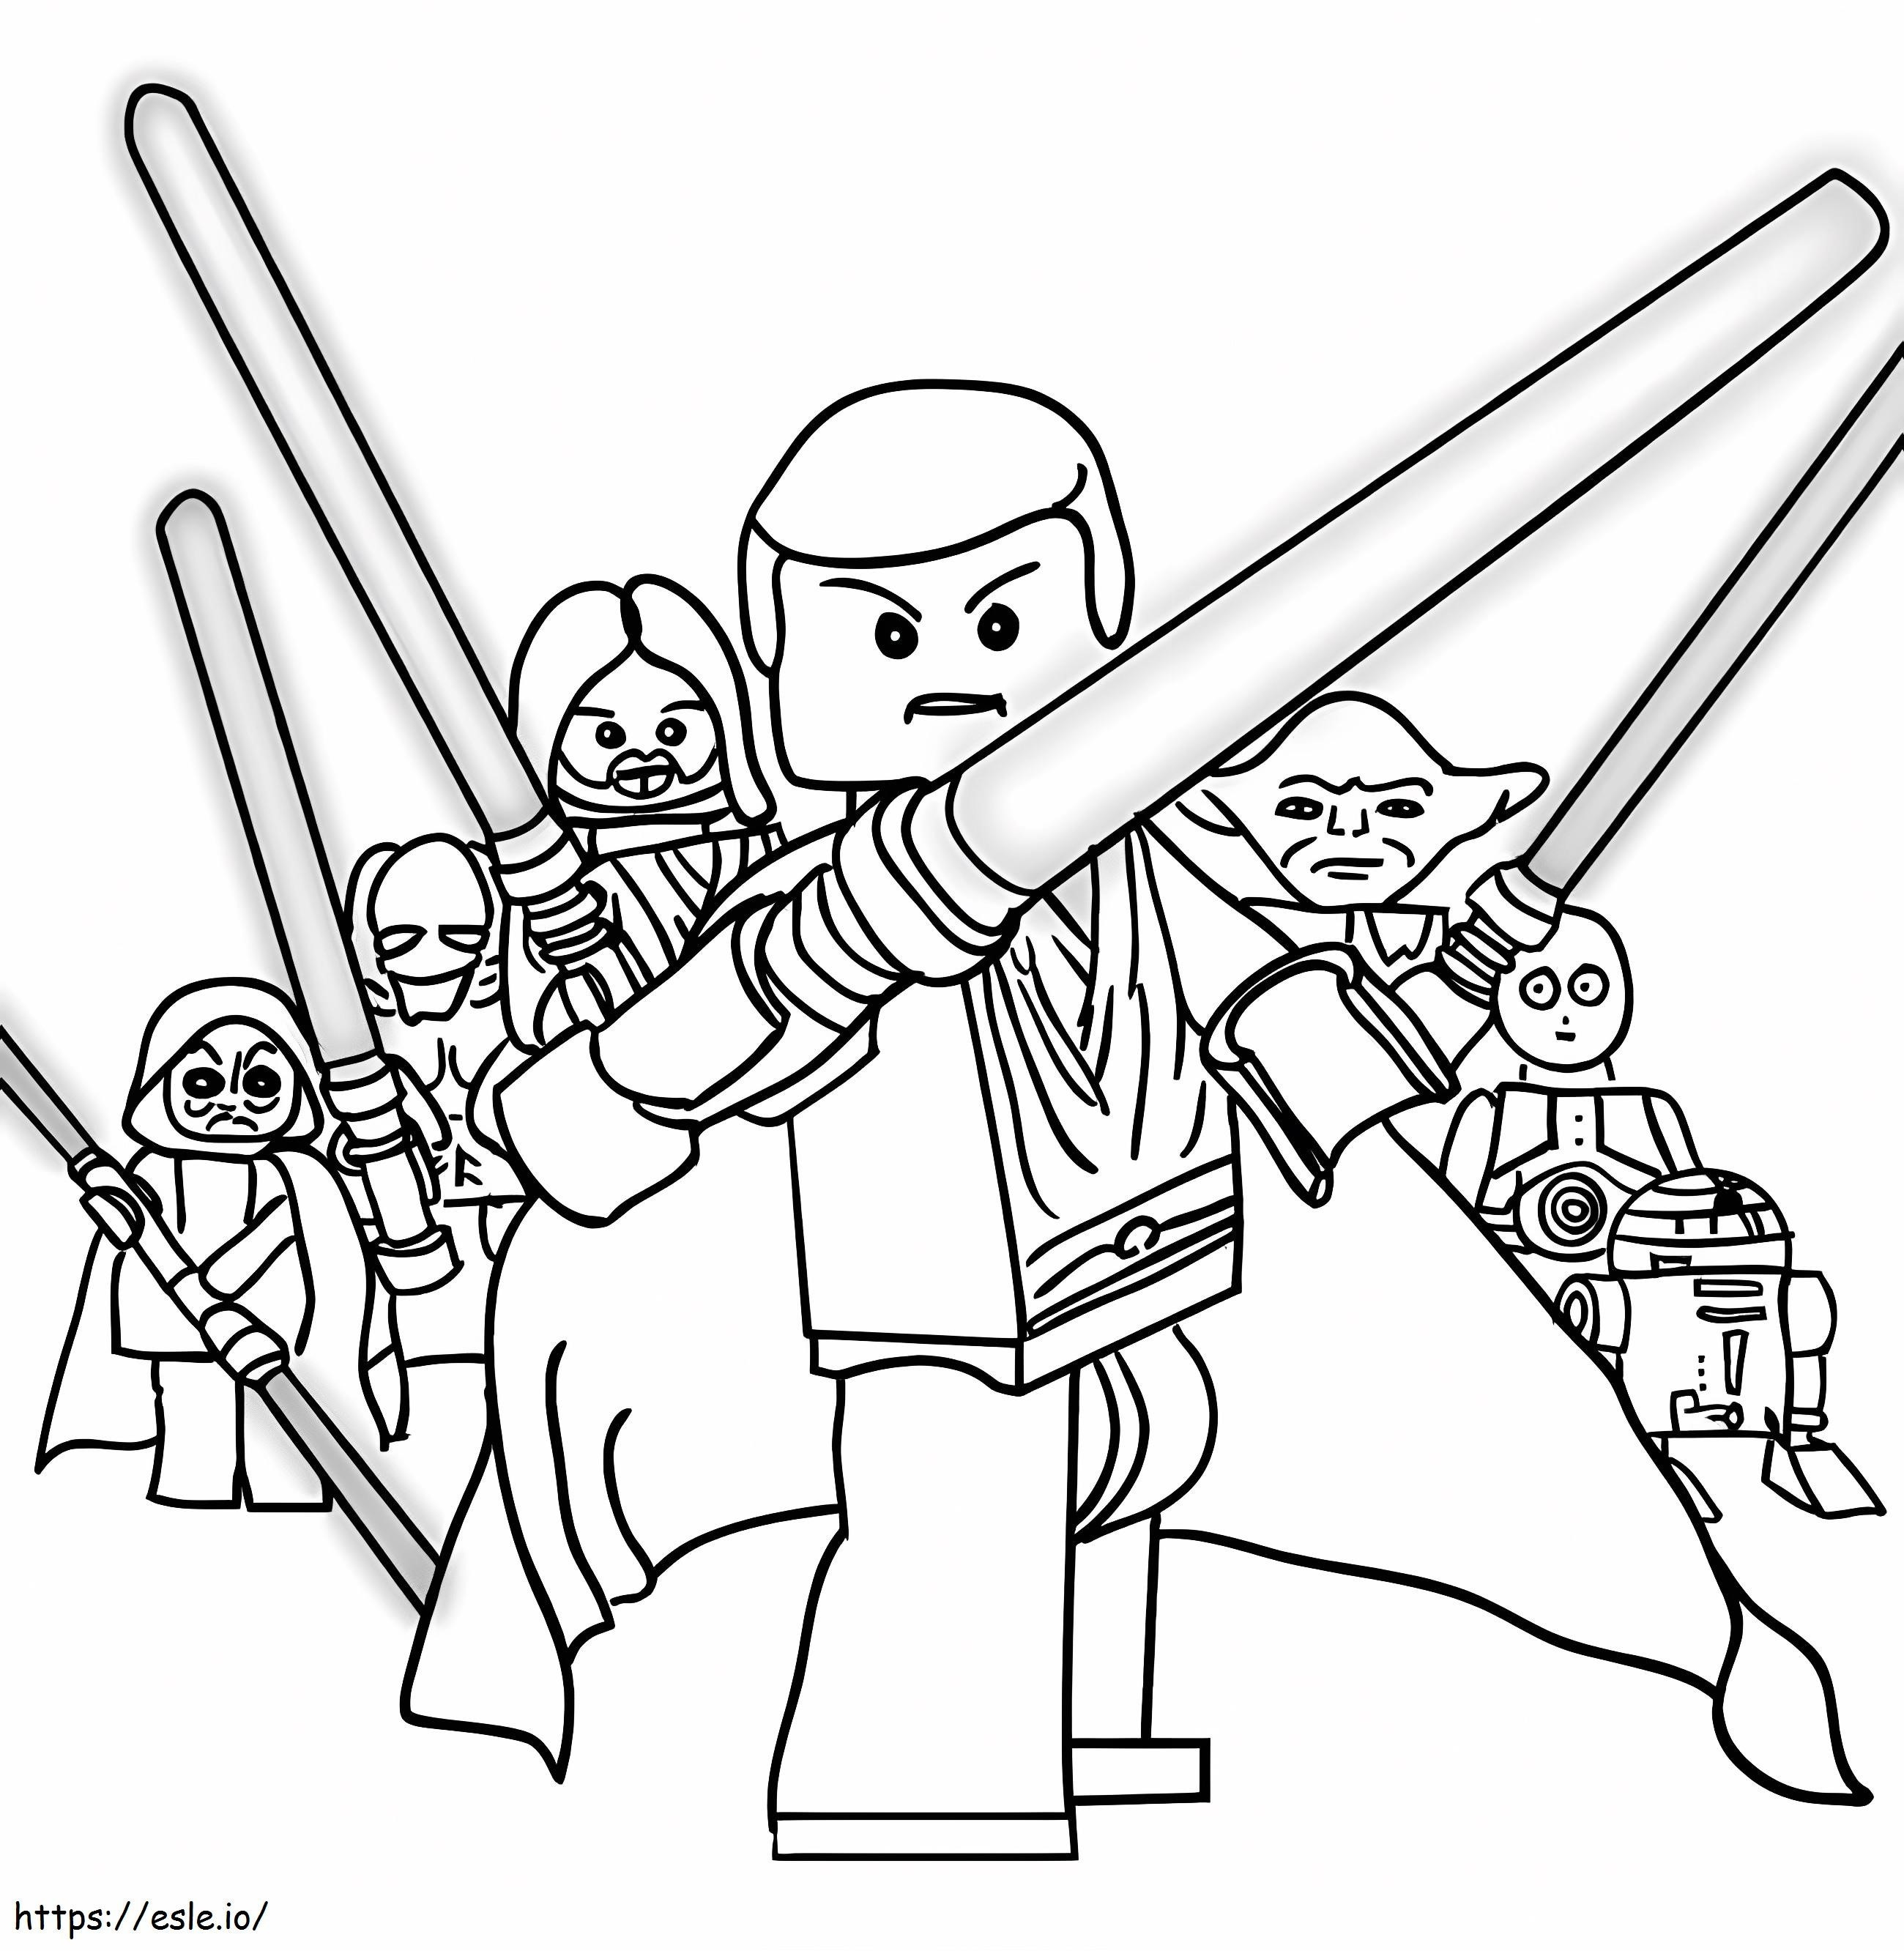 Lego Star Wars 4 coloring page